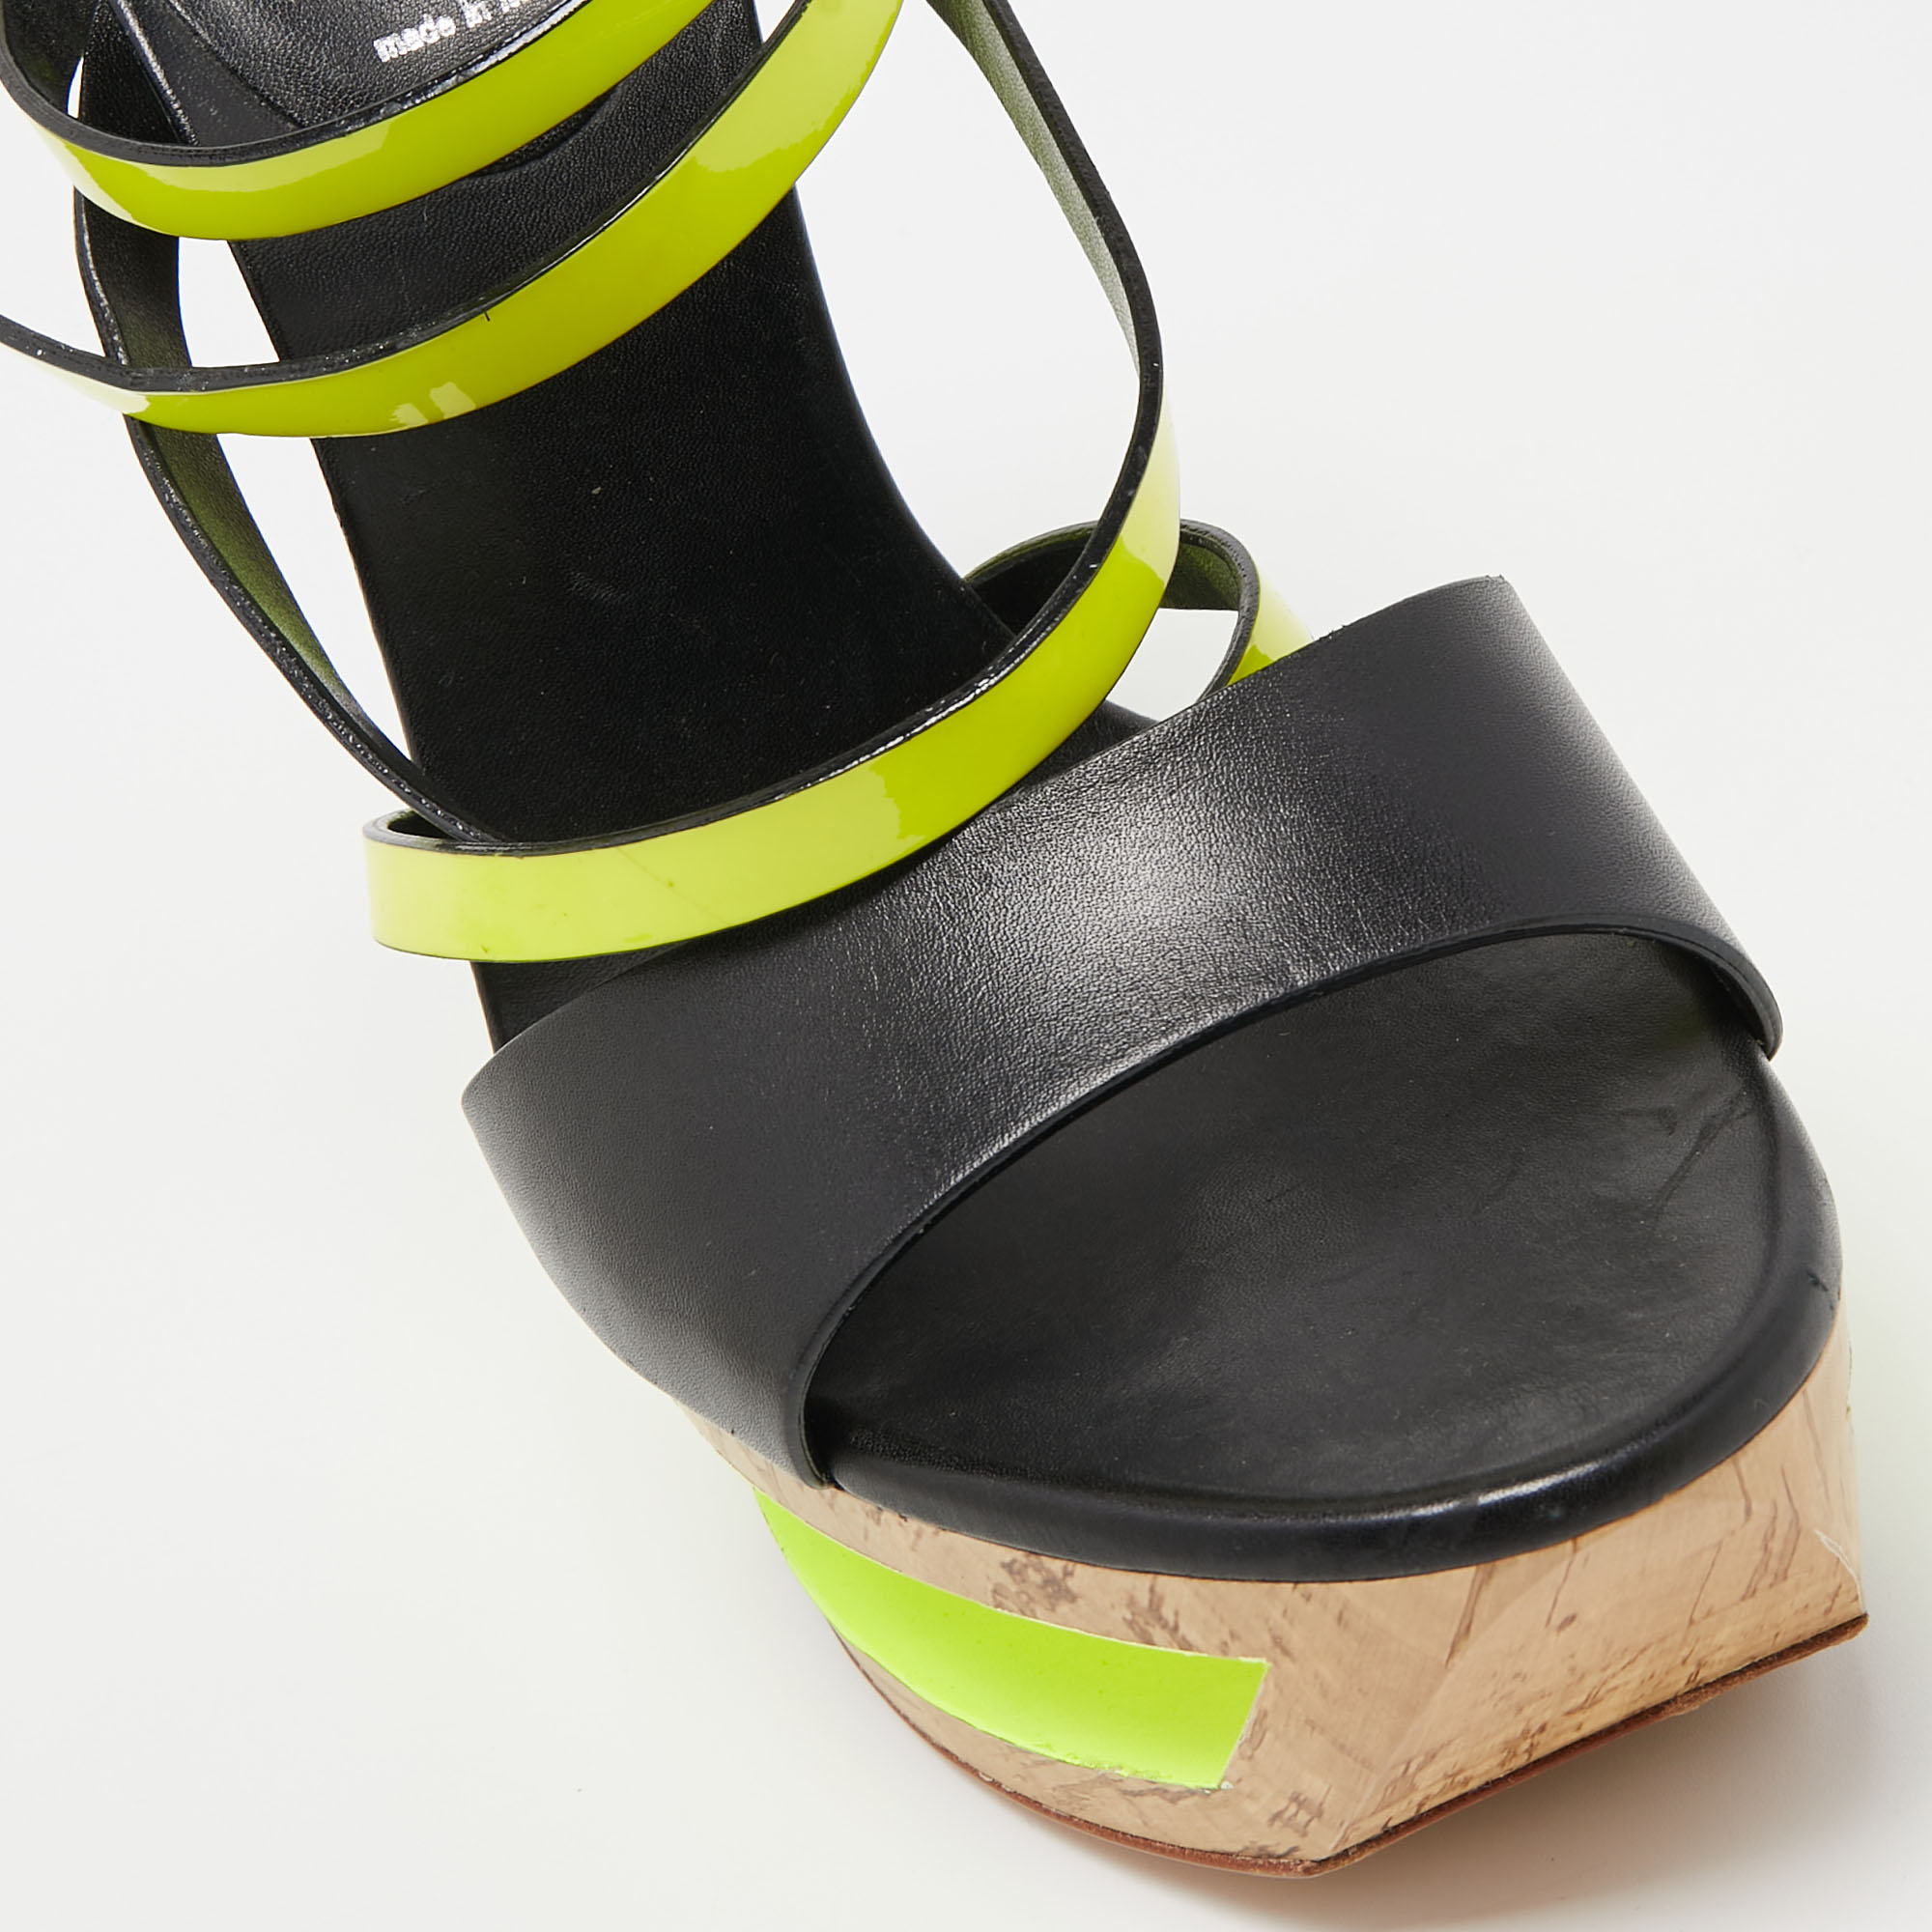 Casadei Black/Neon Yellow Leather And Patent Cork Wedge Platform Strappy Sandals Size 38